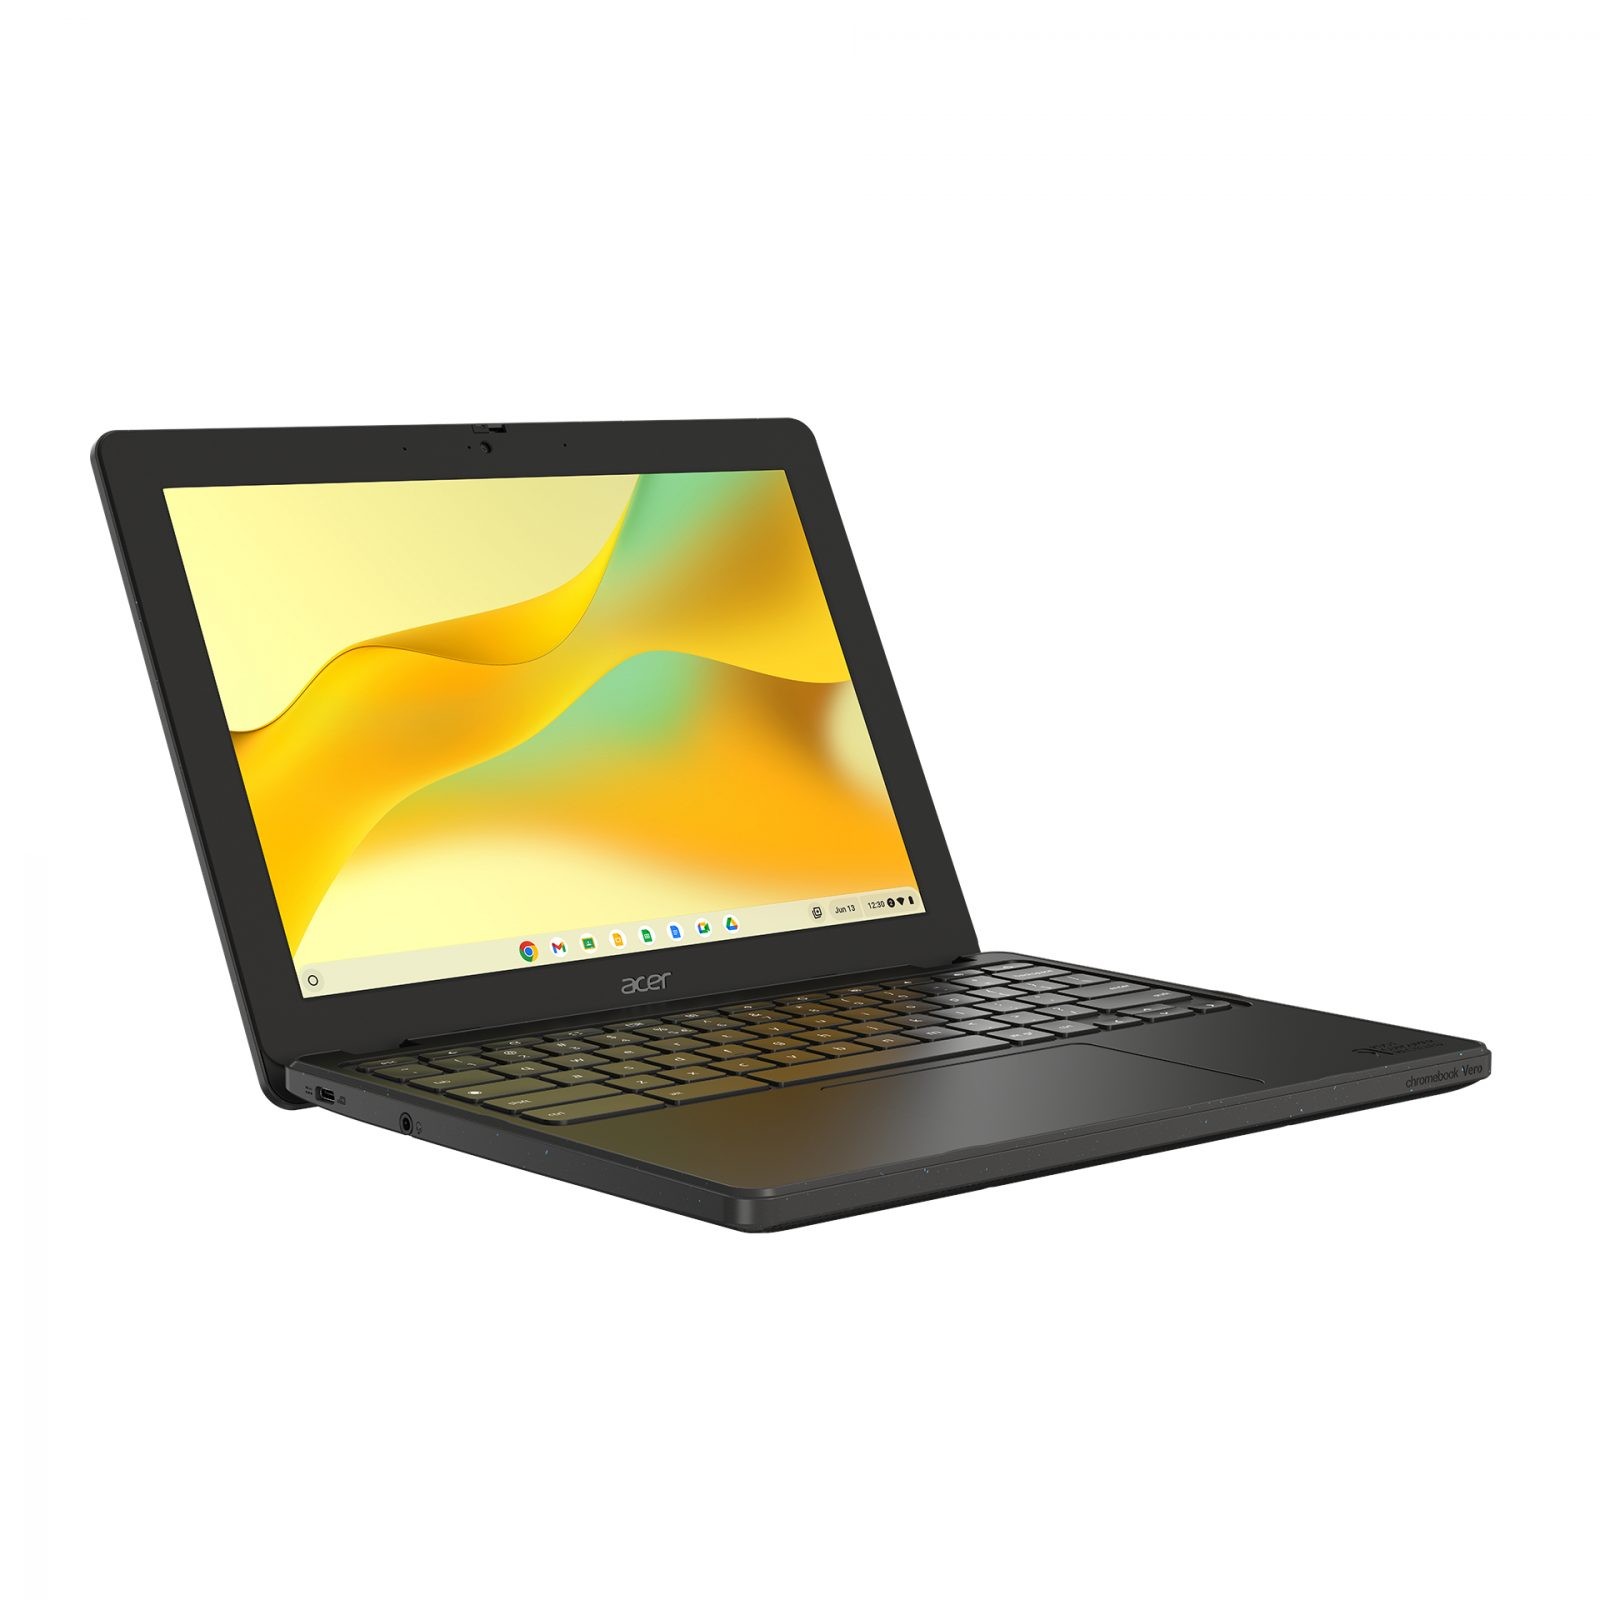 Acer Chromebook Vero: now also in the Education market